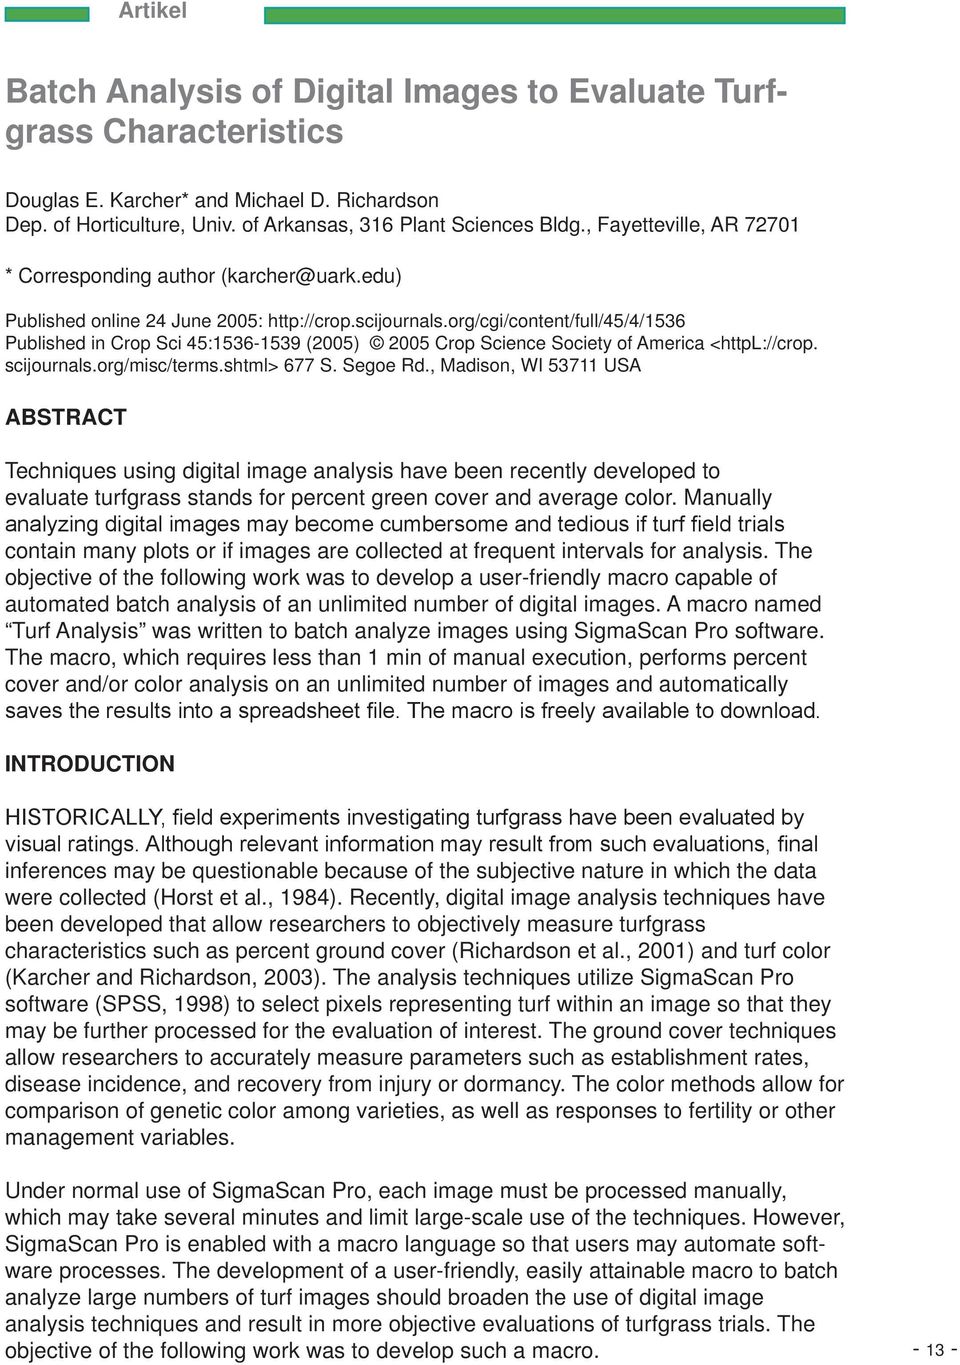 org/cgi/content/full/45/4/1536 Published in Crop Sci 45:1536-1539 (2005) 2005 Crop Science Society of America <httpl://crop. scijournals.org/misc/terms.shtml> 677 S. Segoe Rd.